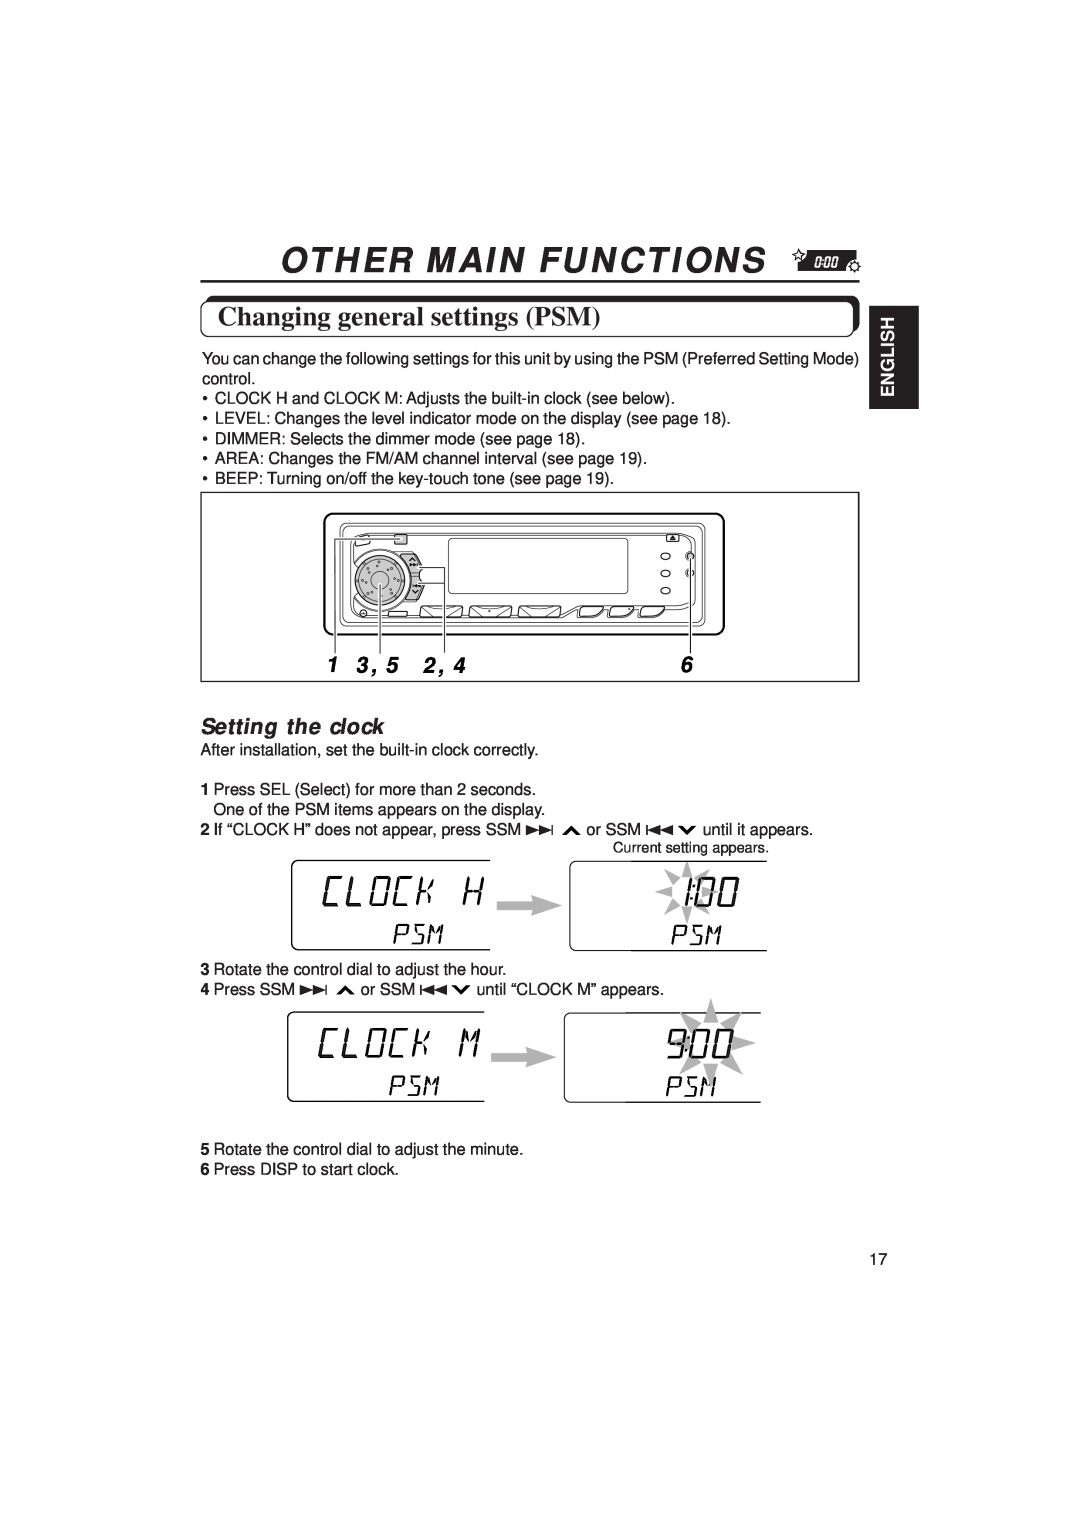 JVC KD-SX939/SX930 manual Other Main Functions, Changing general settings PSM, Setting the clock, English 